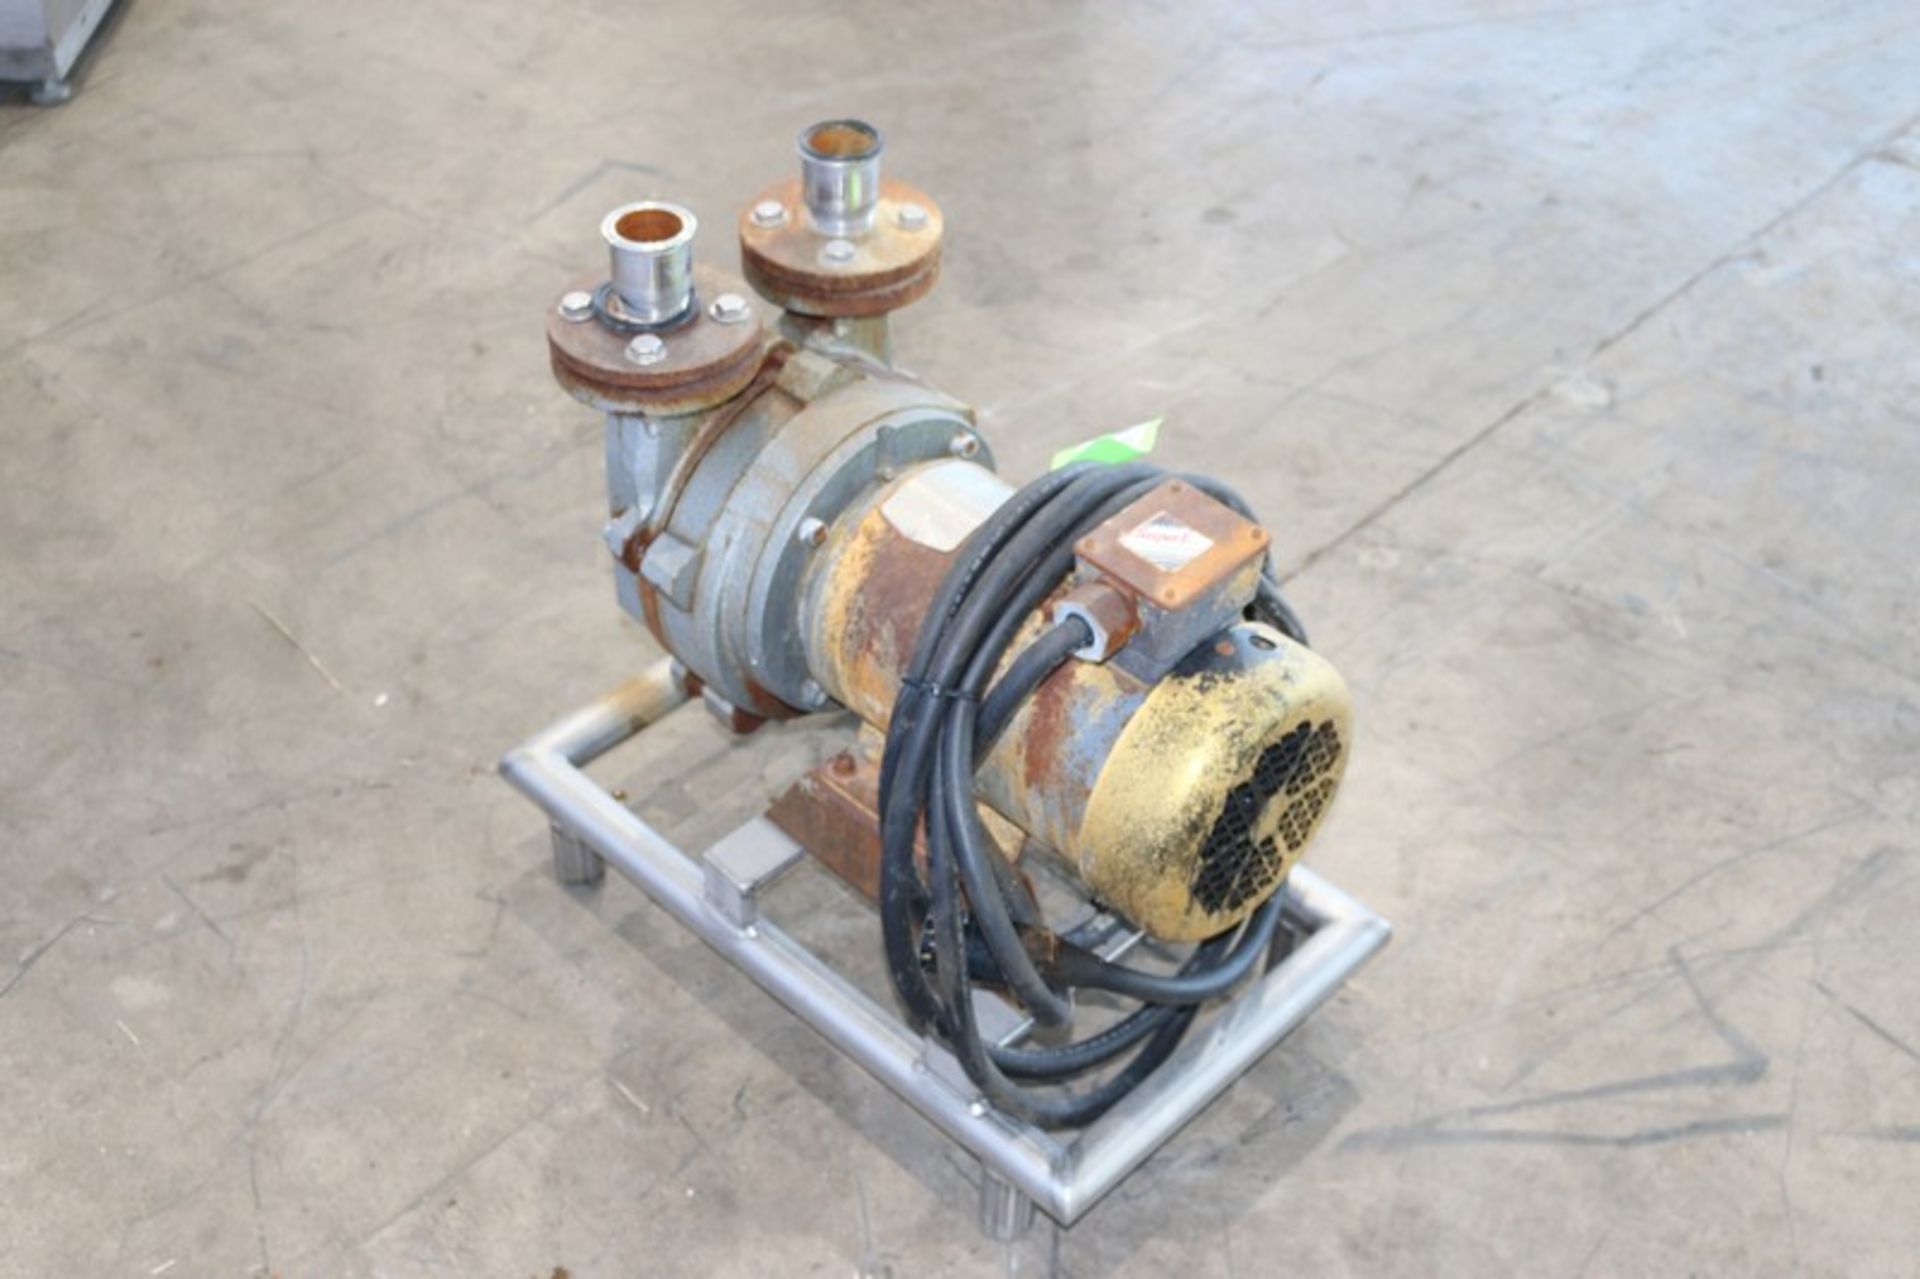 Buusch Vacuum Pump, with Baldor 1755 RPM Motor, 208-230/460 Volts, 3 Phase, with Associated Steam - Image 4 of 5